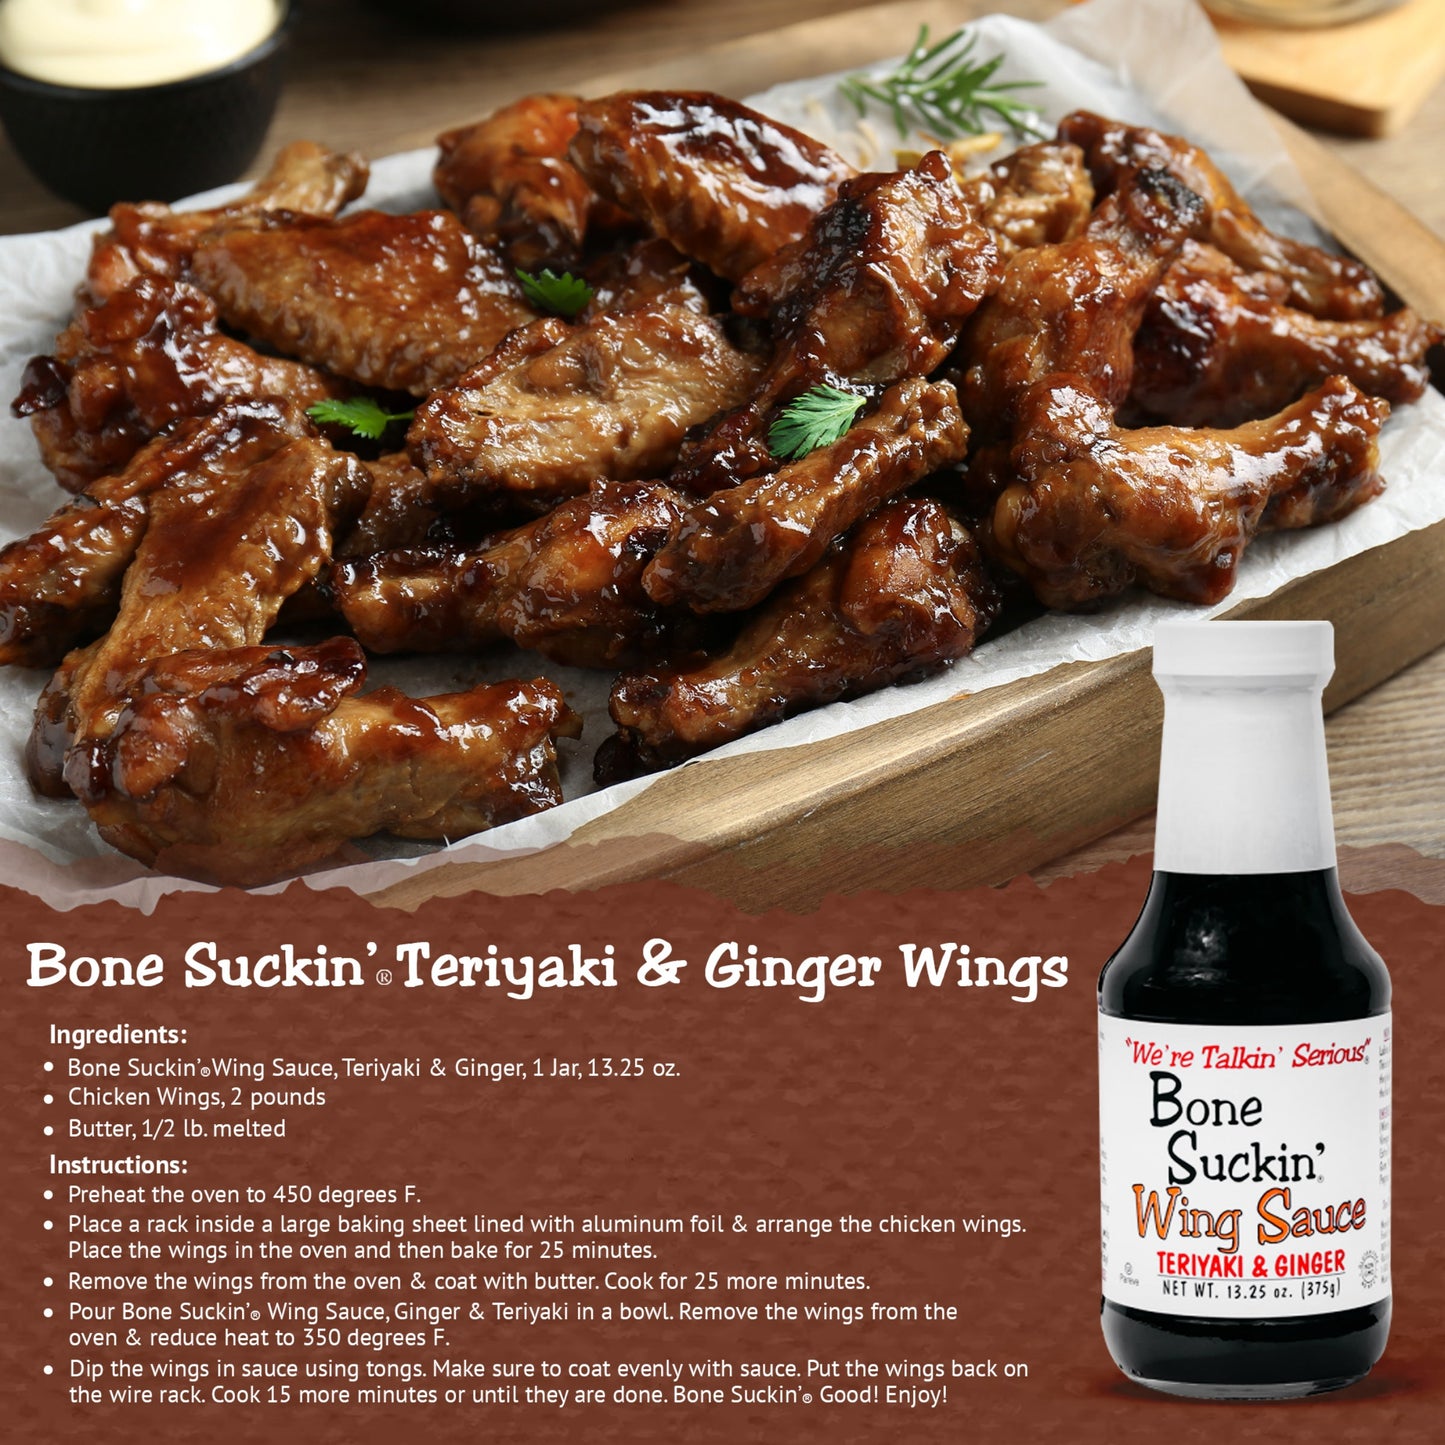 Bone Suckin'® Teriyaki & Ginger Chicken Wings Recipe. Ingredients: Bone Suckin Teriyaki & Ginger Wing Sauce, 1 jar. 2 lbs chicken wings. 1/2 lb melted butter. Instructions: Preheat oven to 450. Place a rack inside of a large baking sheet lined with foil. Arrange wings. Bake for 25 minutes. Remove wings and coat with butter. Cook 25 more minutes. Pour Bone Suckin' Teriyaki & Ginger Wing Sauce in a bowl. Remove wings from oven and reduce heat to 350. Coat wings in sauce. Cook 15 more minutes